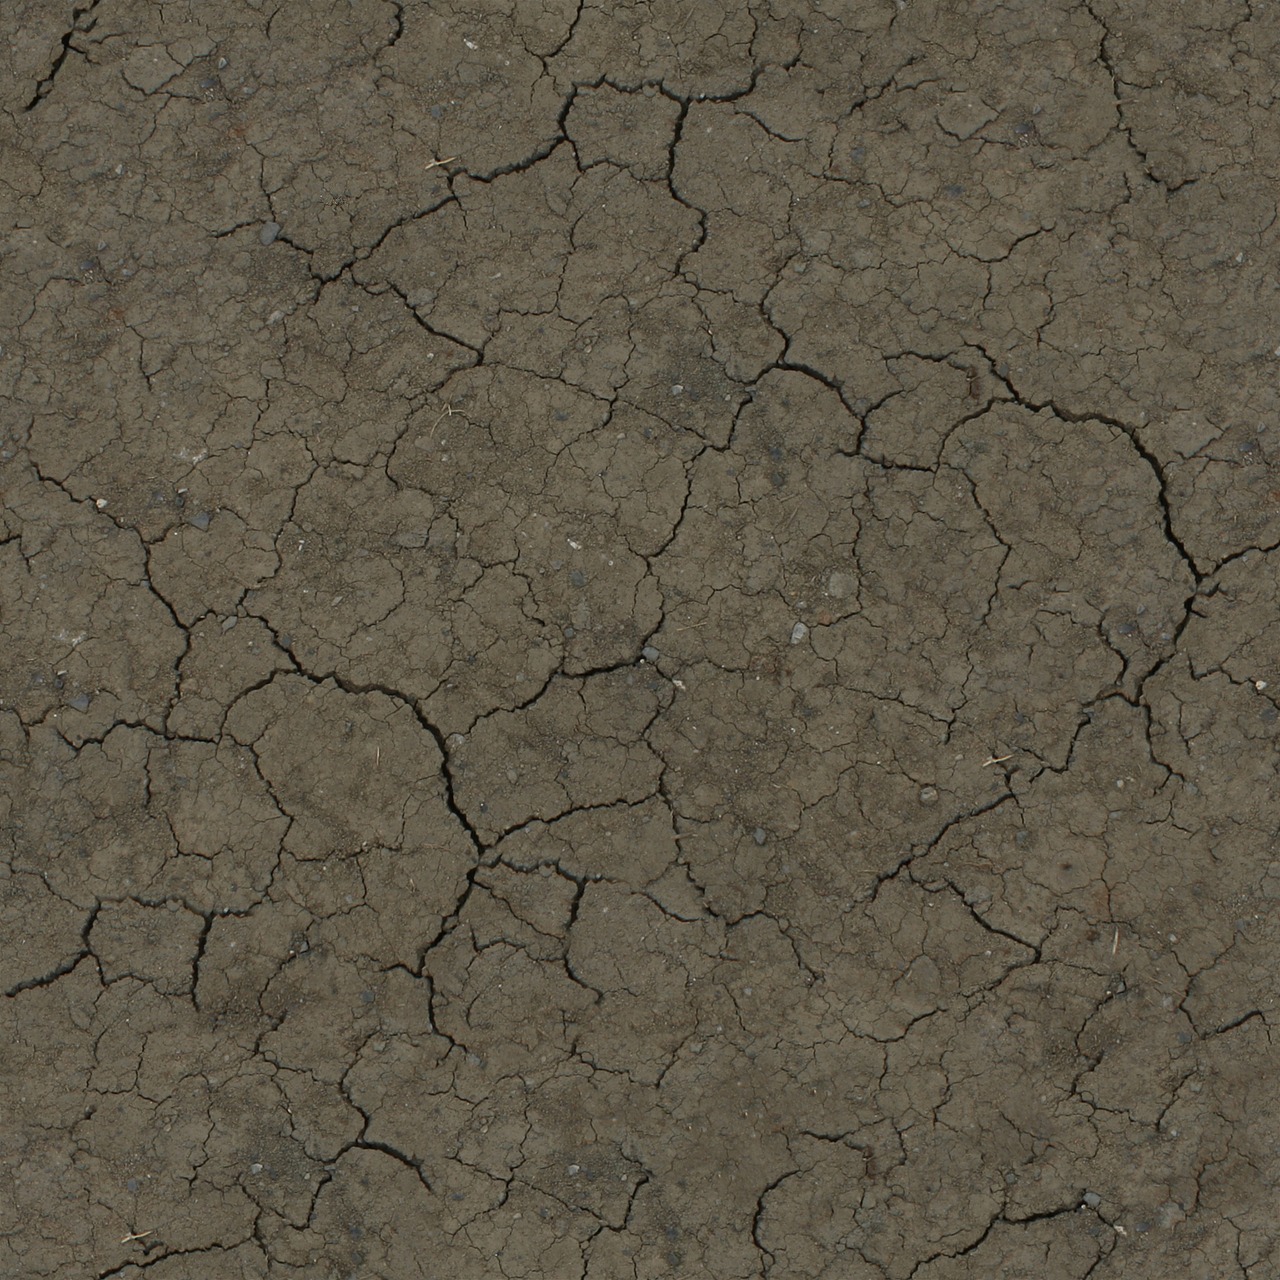 crackled ground earth free photo